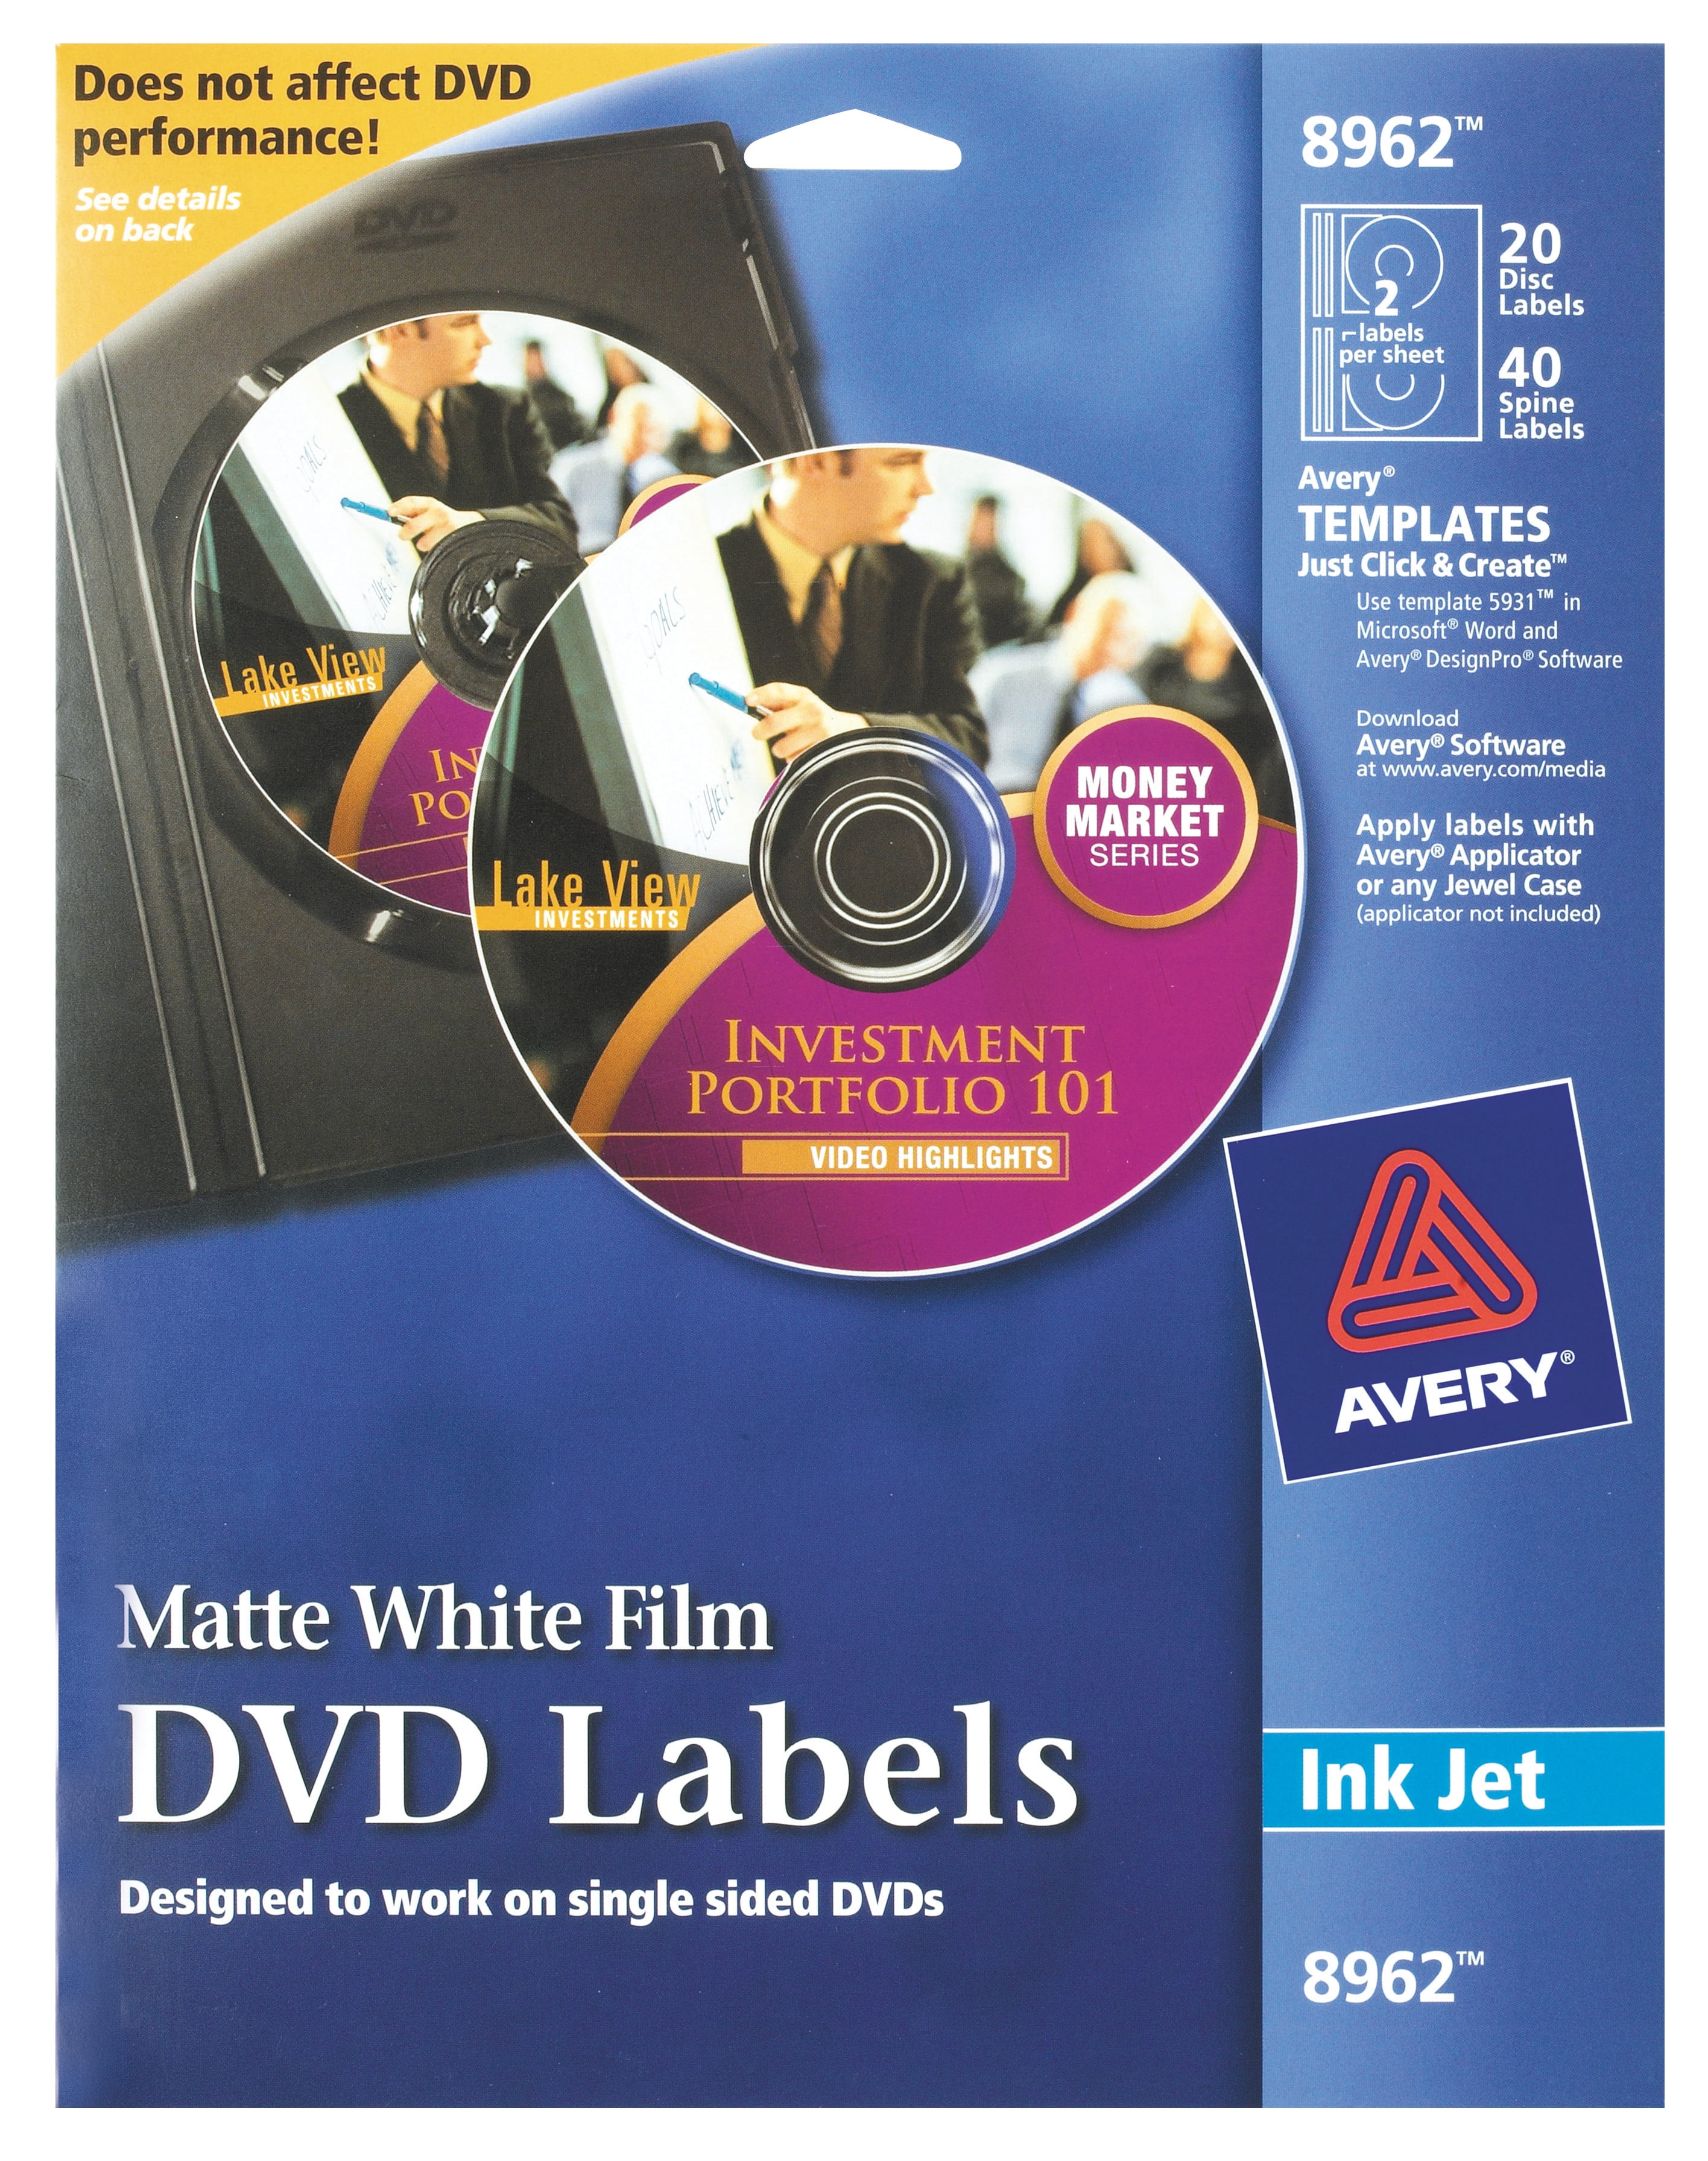 2-Packs, 64 Spine Labels, 32 Face Labels Avery 28669 Matte White CD Labels 